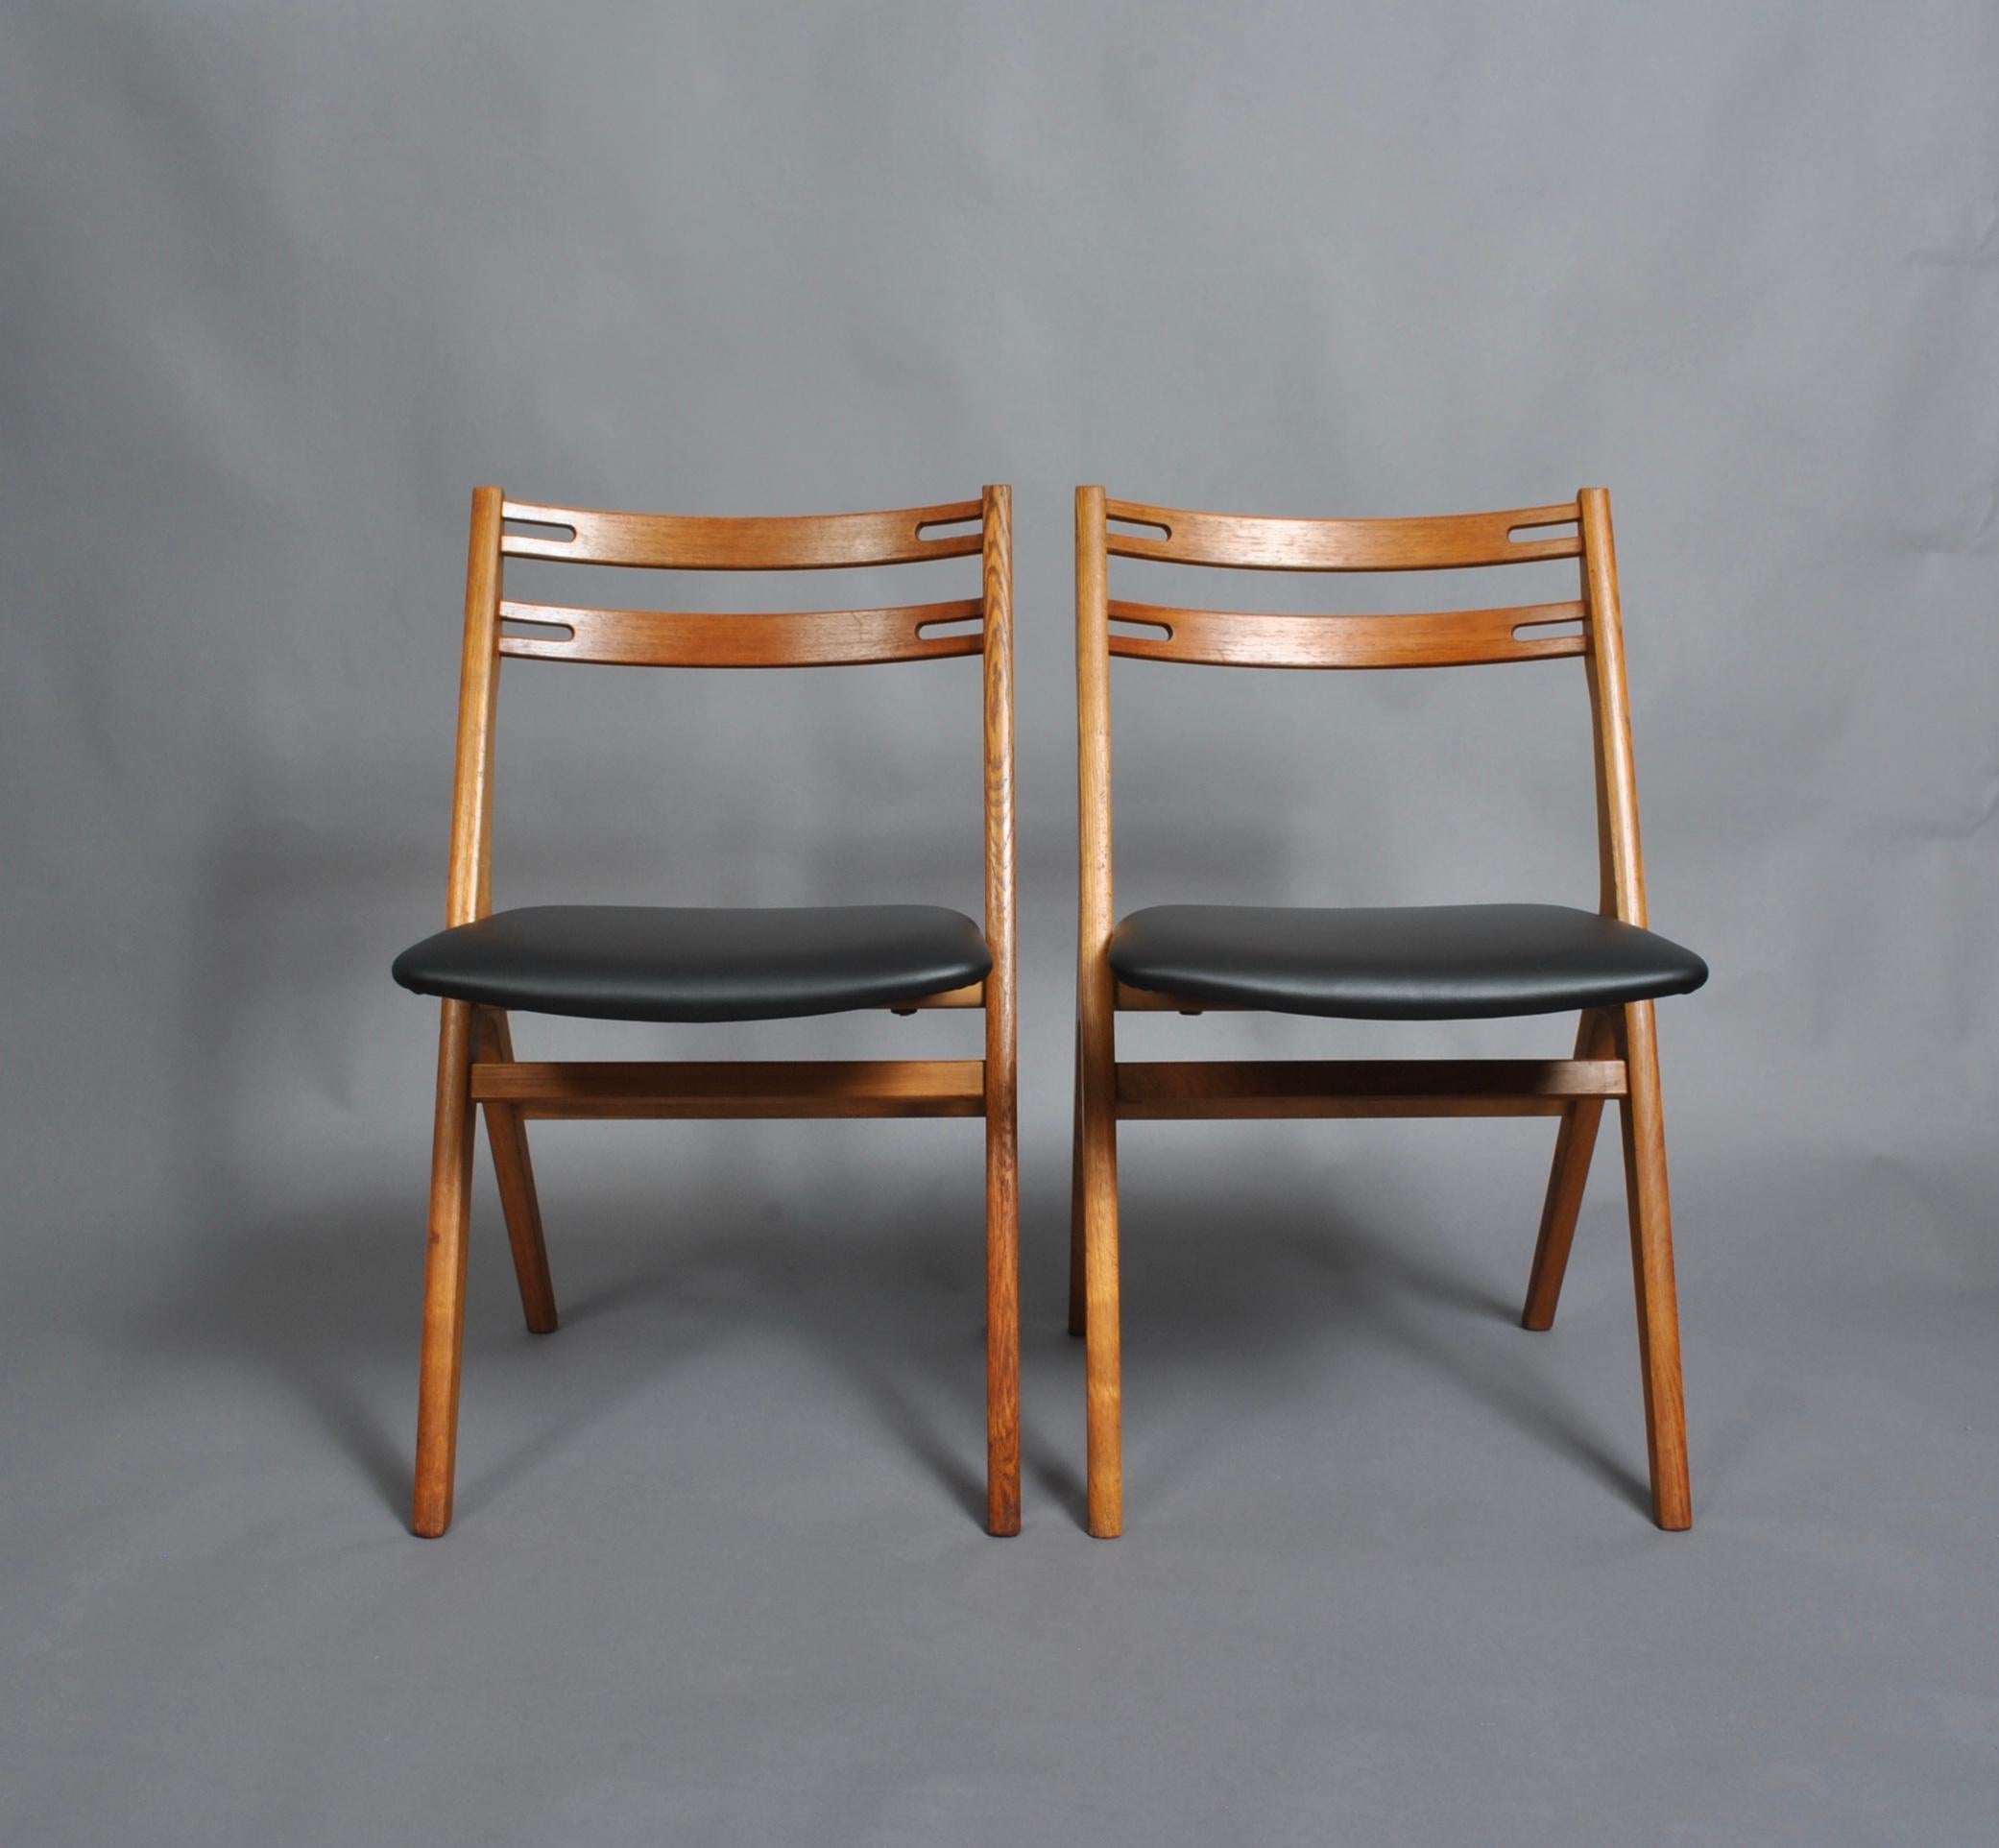 A set of six Danish oak saw back design dining chairs designed by Arne Vodder for Sibast, Denmark, circa 1960. Re-oiled frames with new reupholstered black leather seats. Original Sibast labels still intact underneath. Fabulous midcentury walking